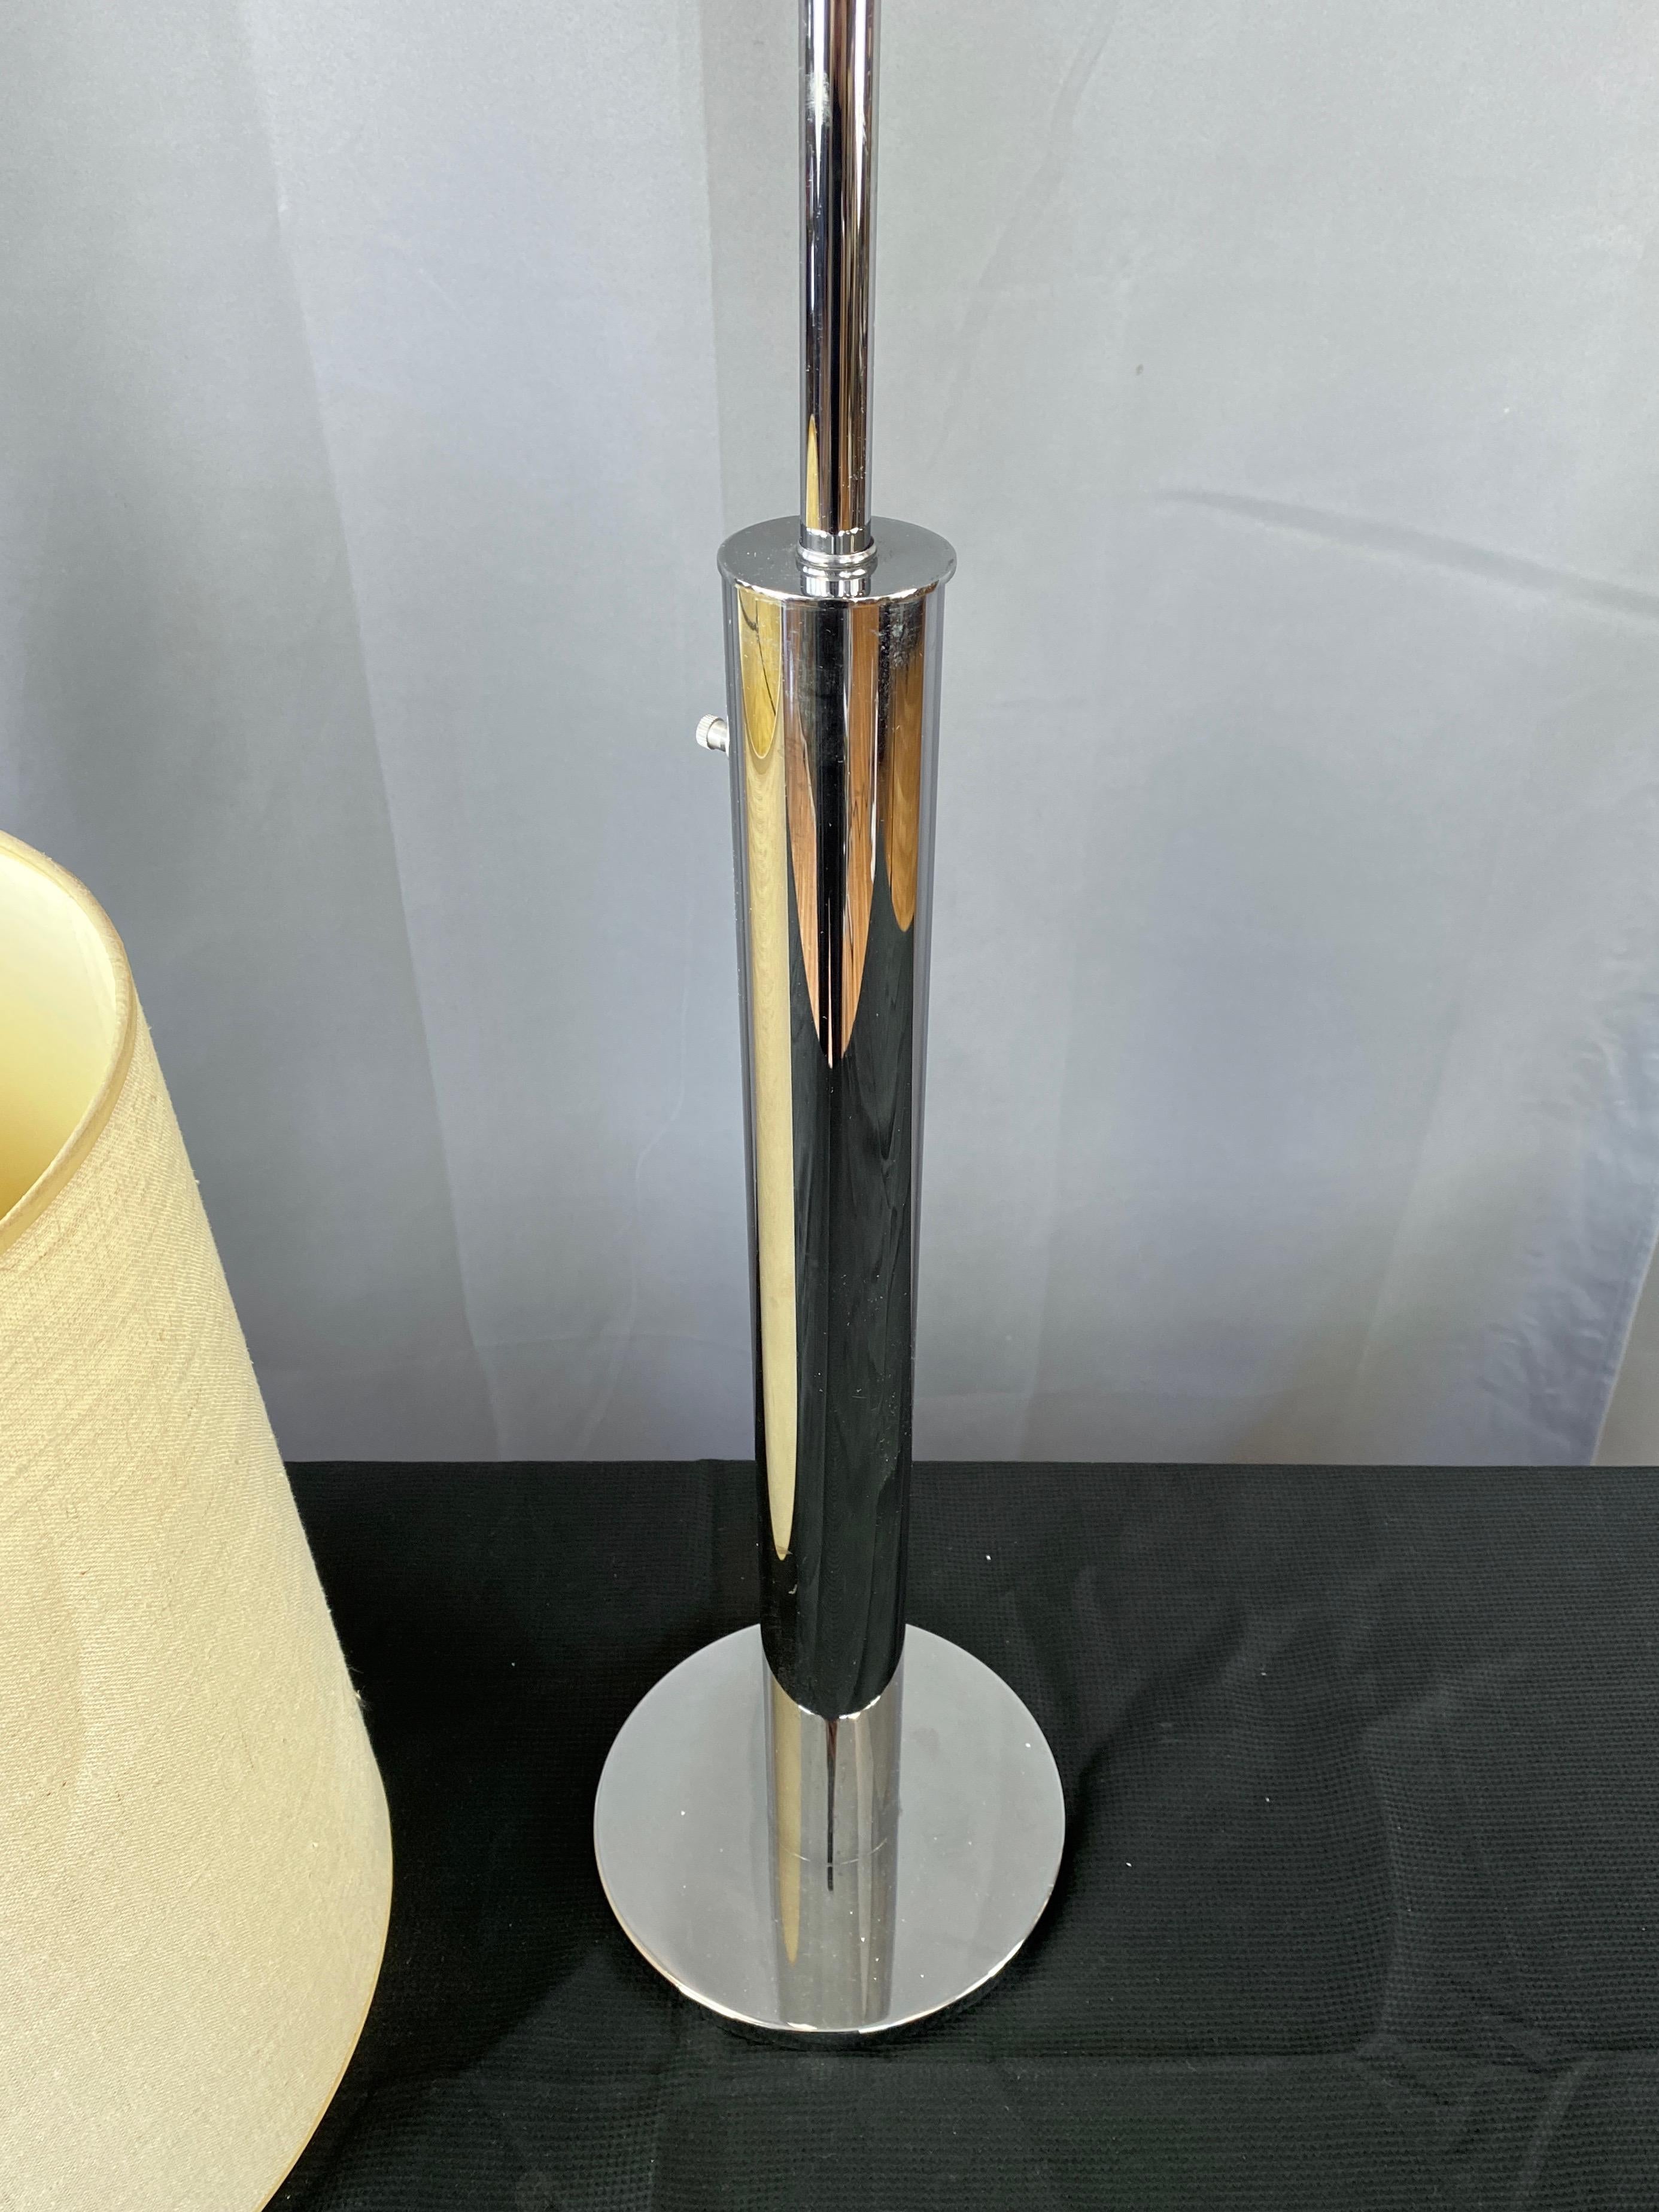 Enameled Nessen Tall Minimalist Chrome Table Lamp with Original Shade, c. 1970 For Sale